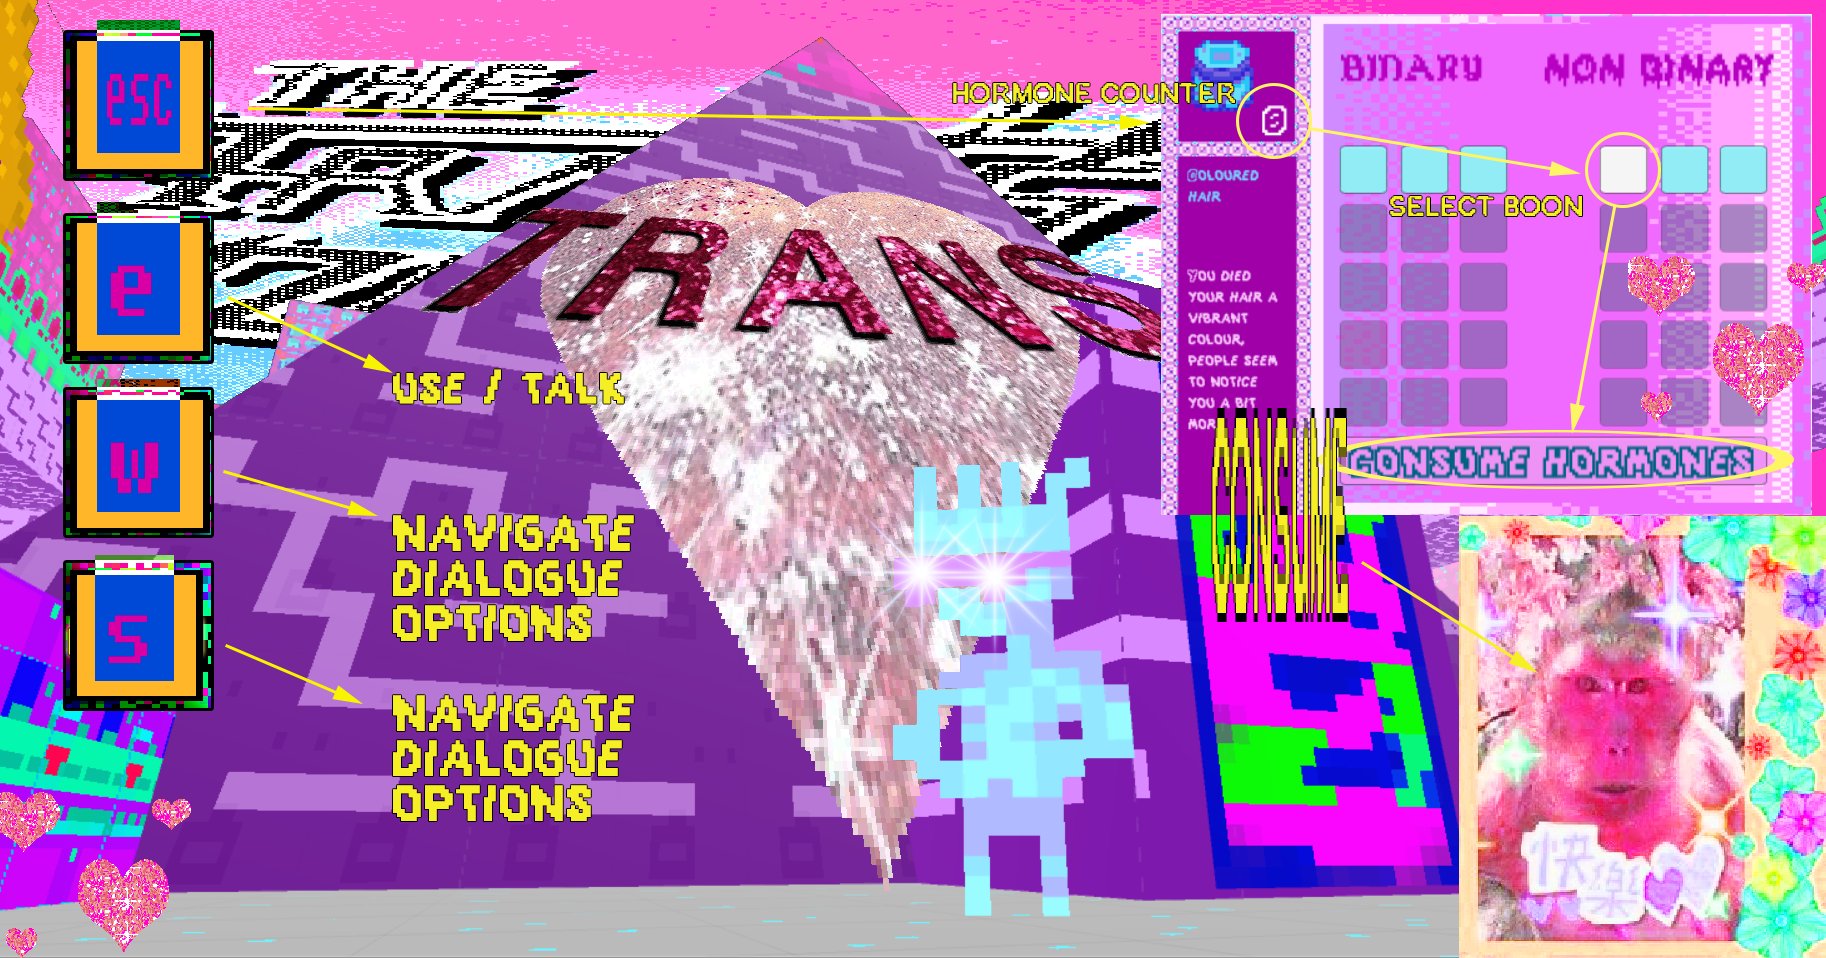 Crowded screen with faded pixelated person and a large heart with the word 'trans' above it. Boxes saying 'esc' and 'e' and 'w' and 's' with menu items next to them. A monkey face with sticker decorations around it in a frame. A grid with 'binary' and 'non binary' with small squares with arrows pointing to 'consume hormones'.